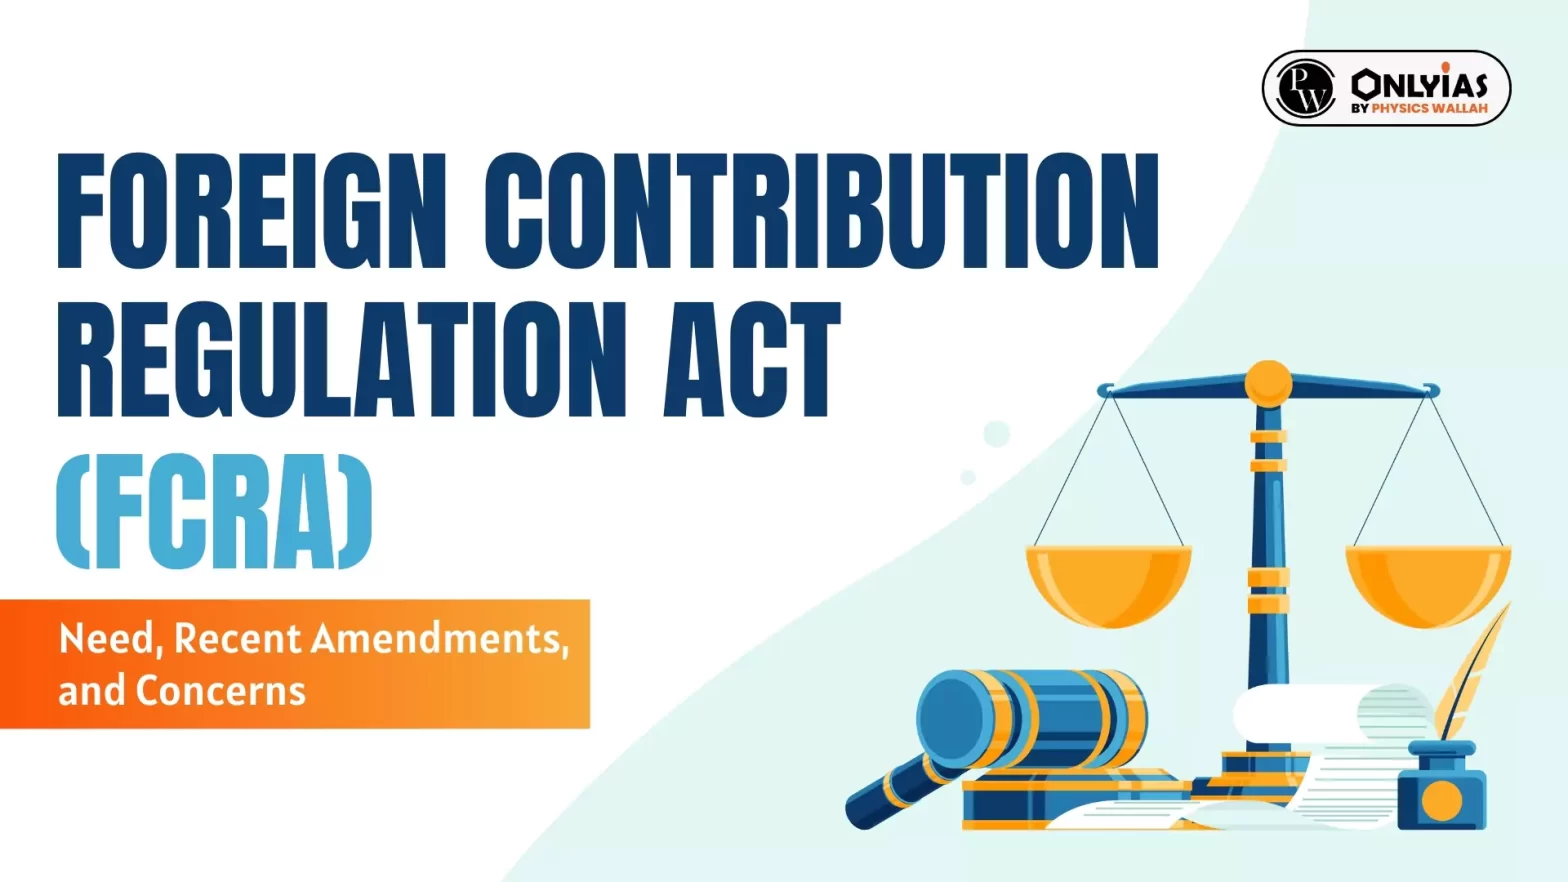 Foreign Contribution Regulation Act (FCRA) Need, Recent Amendments